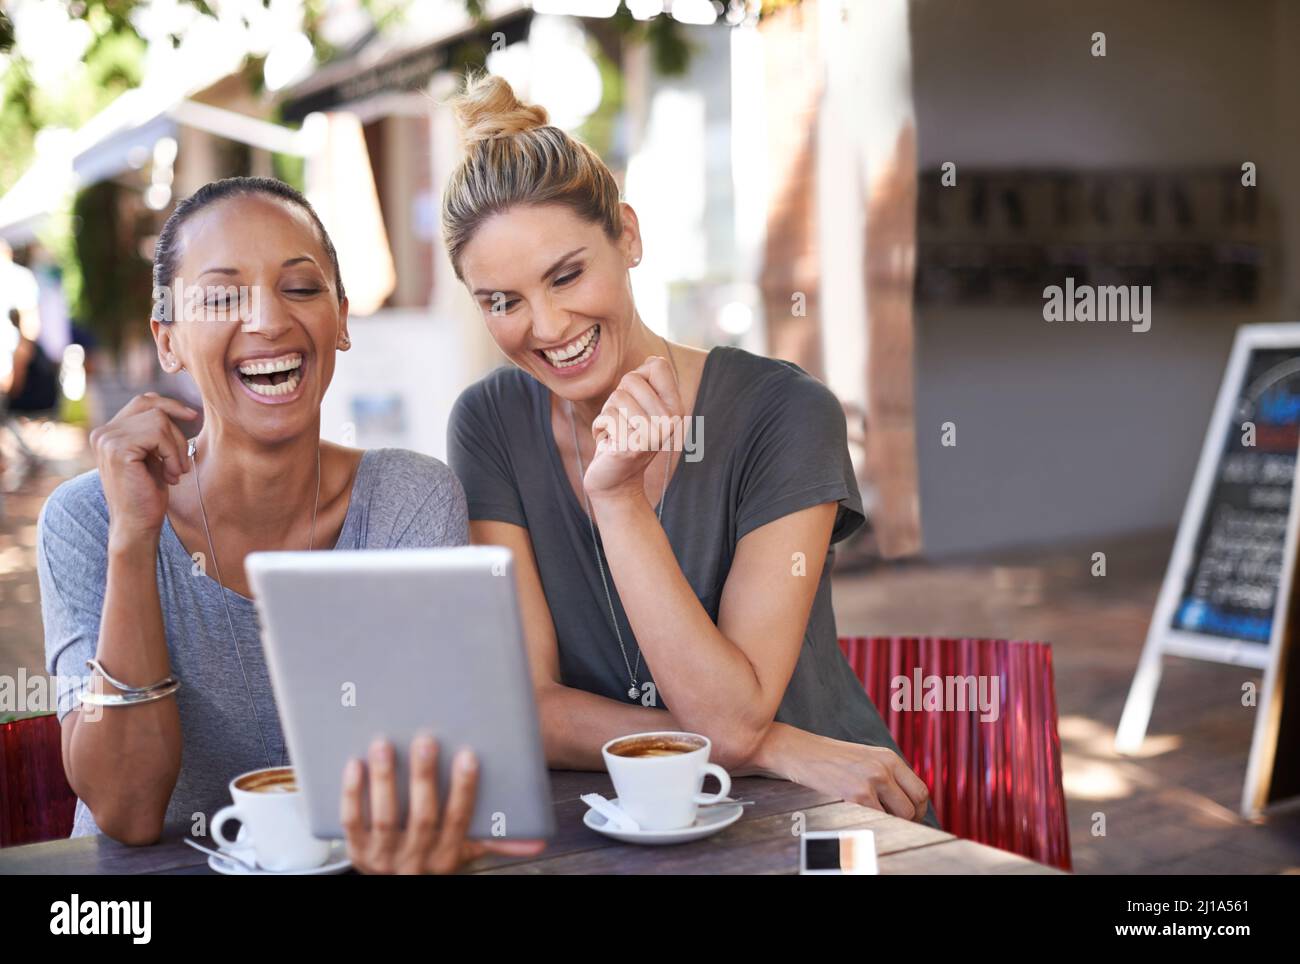 Sharing a laugh between besties. Two young women looking at a tablet in a coffee shop. Stock Photo